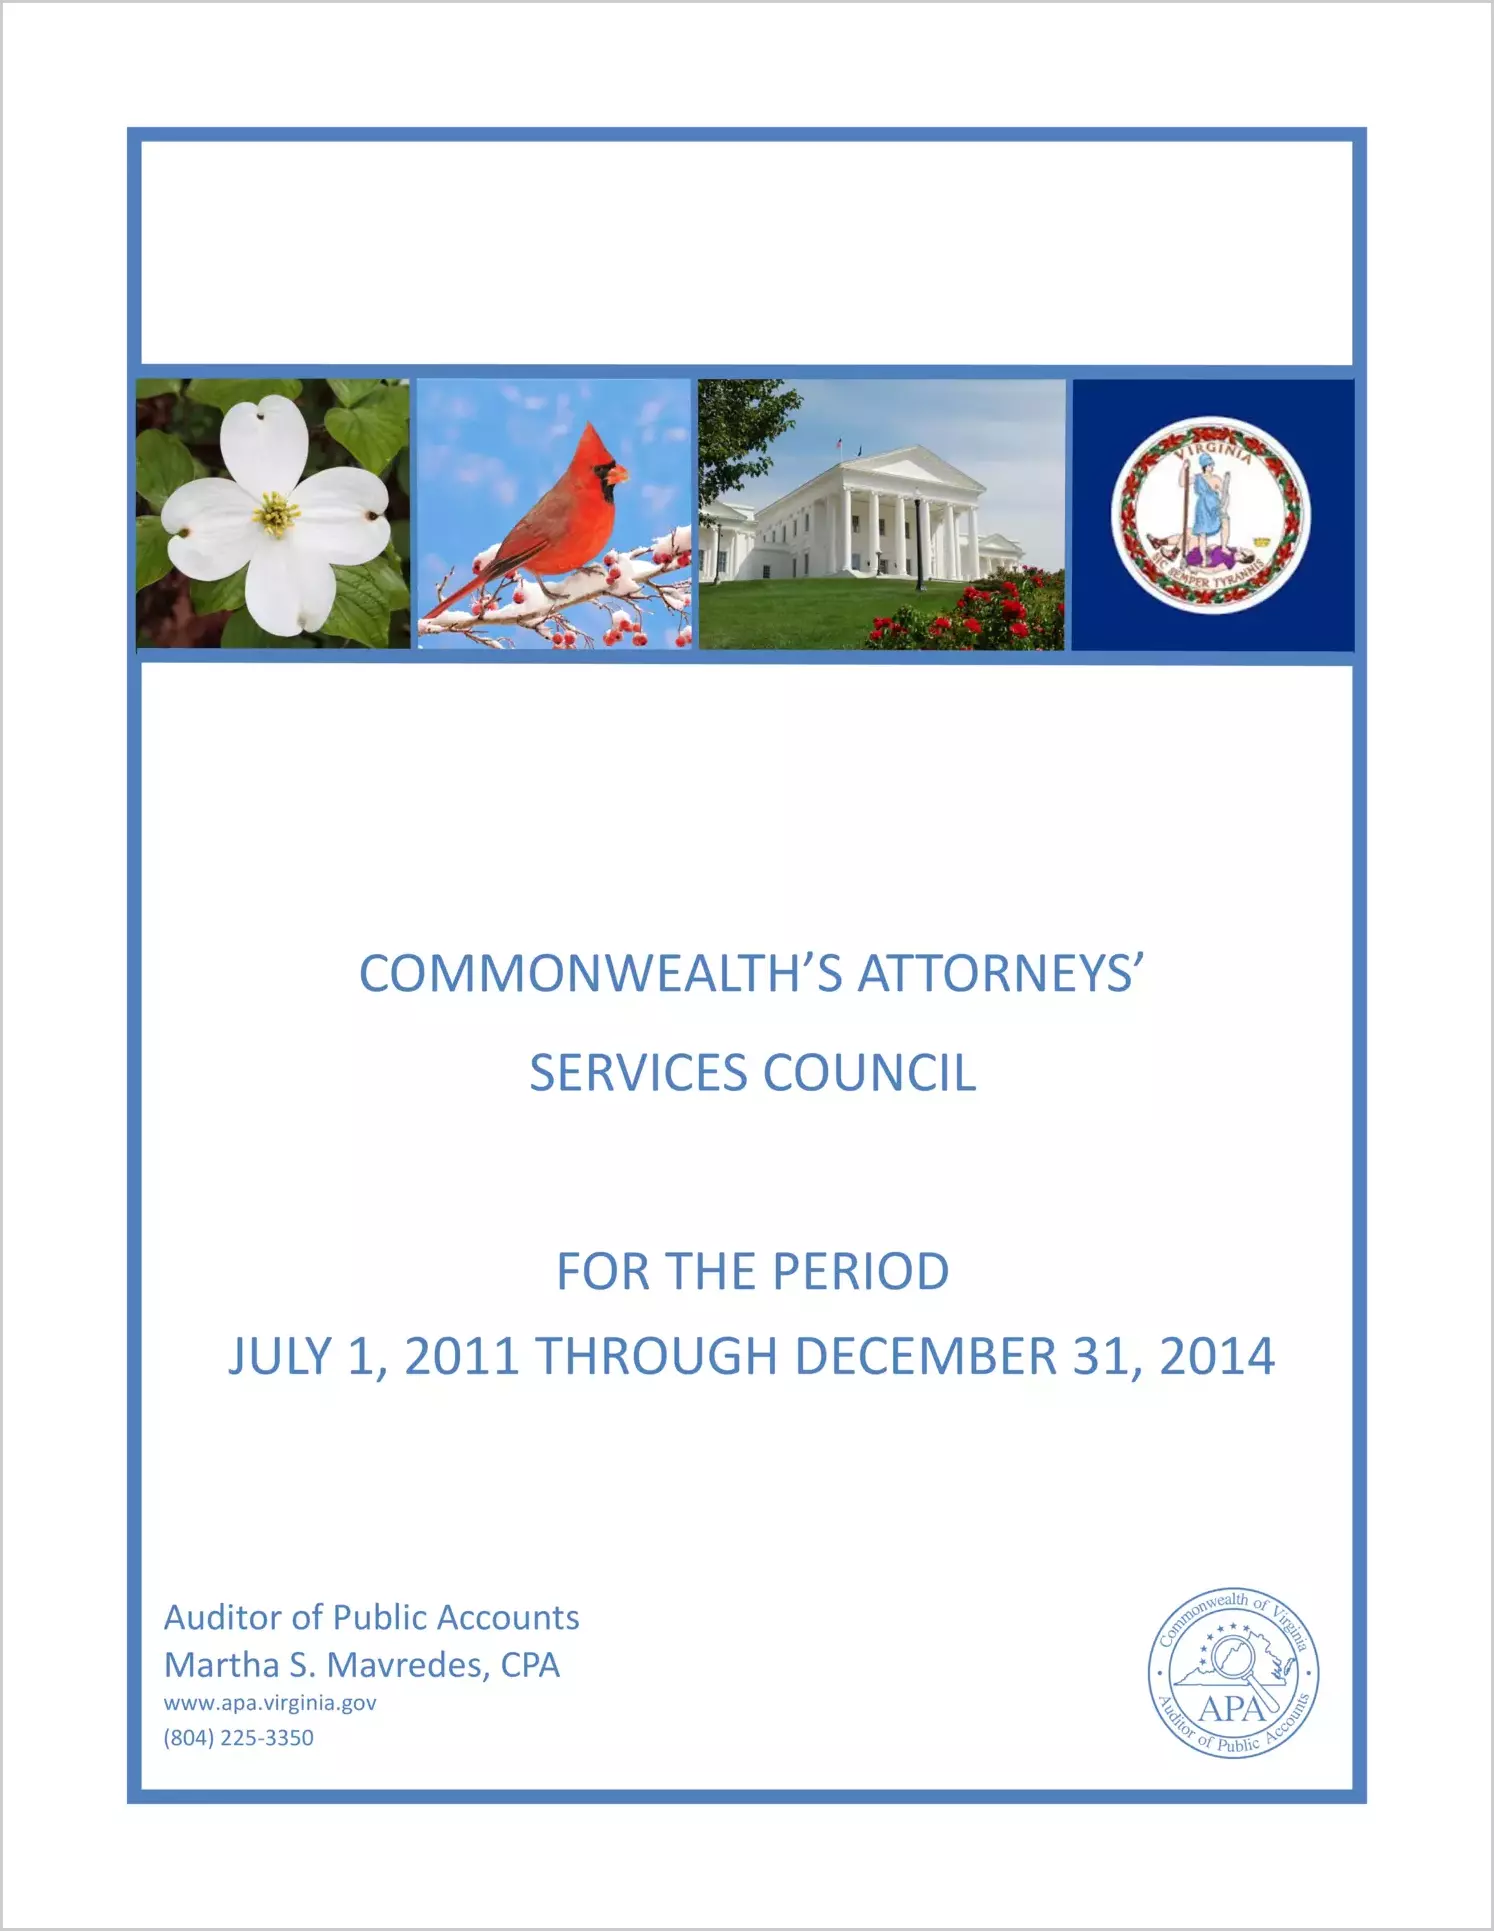 Commonwealth's Attorneys` Services Council for the period July 1, 2011 through December 31, 2014